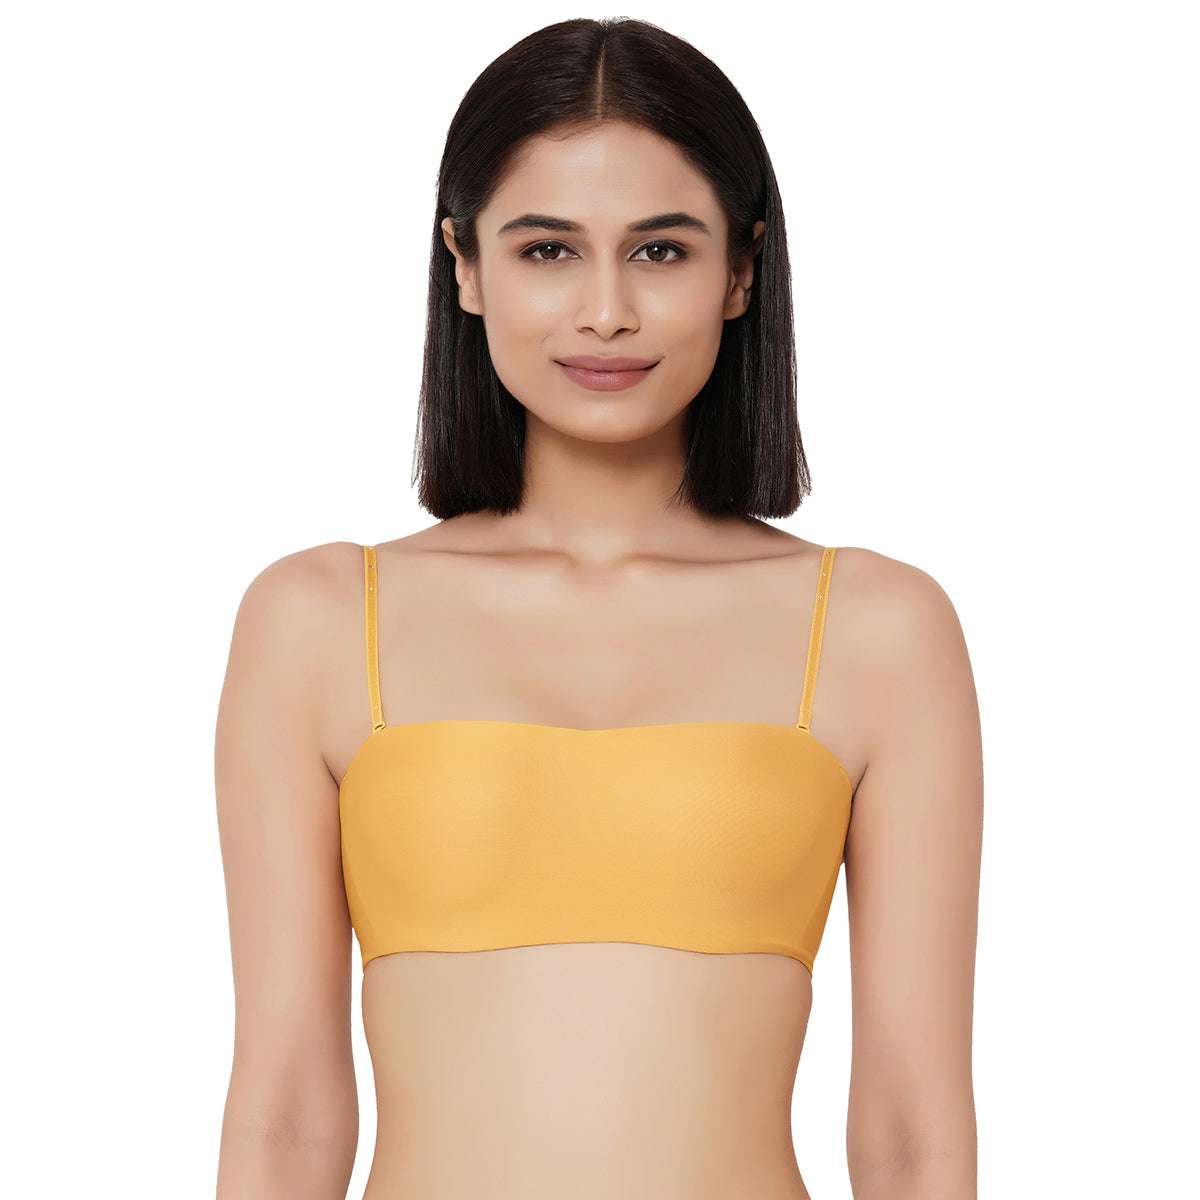 Buy Basic Mold Padded Wired Half Cup Strapless Bandeau T Shirt Bra